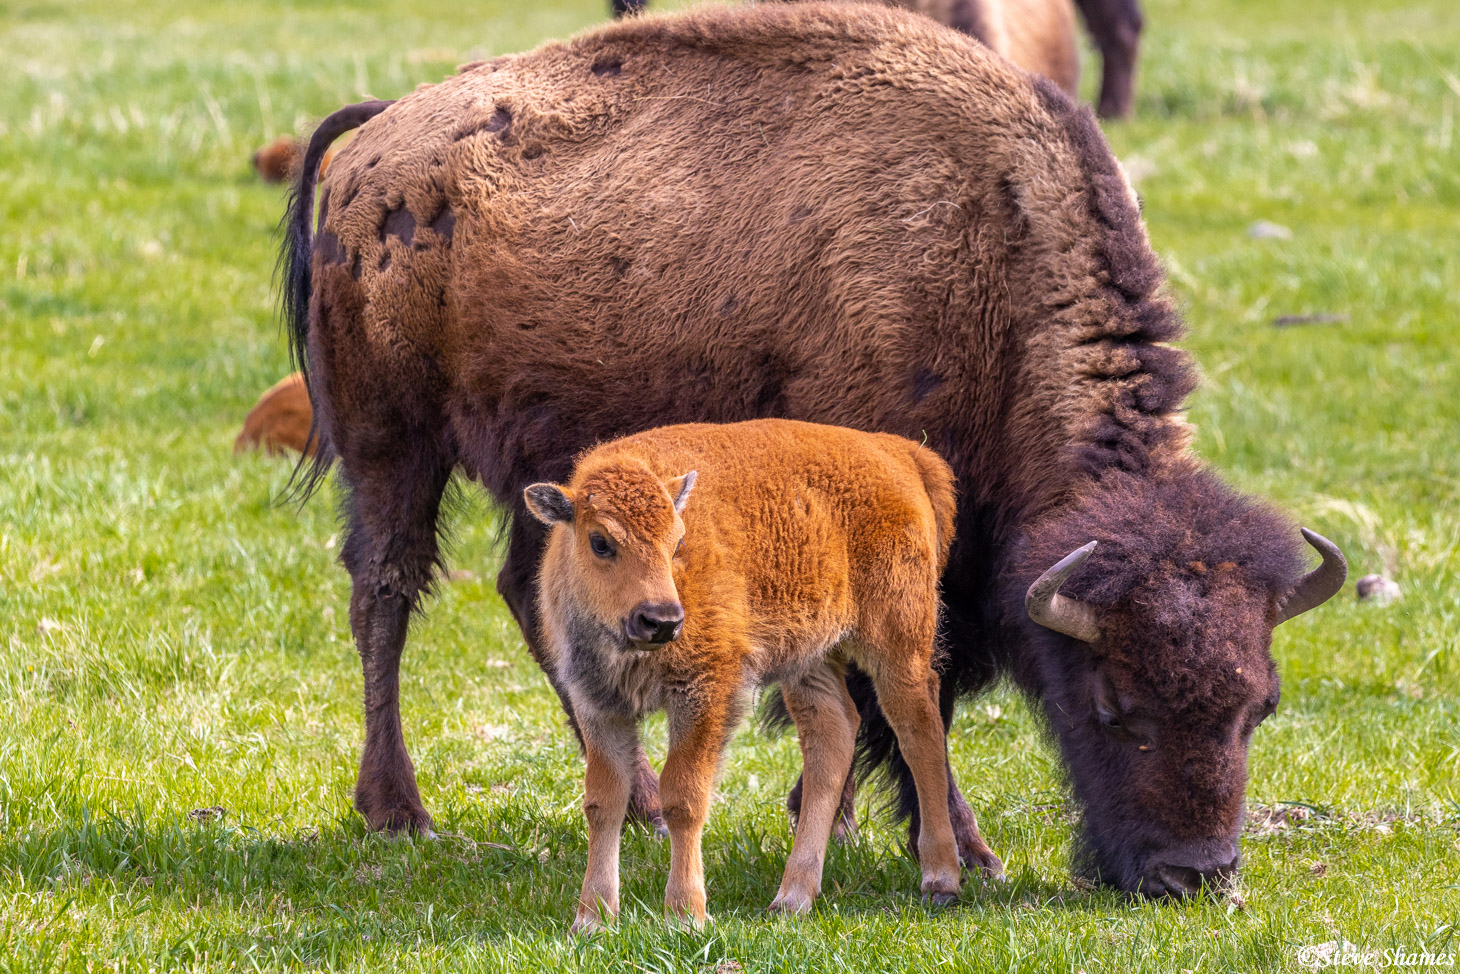 Bison mother and calf at Custer State Park.